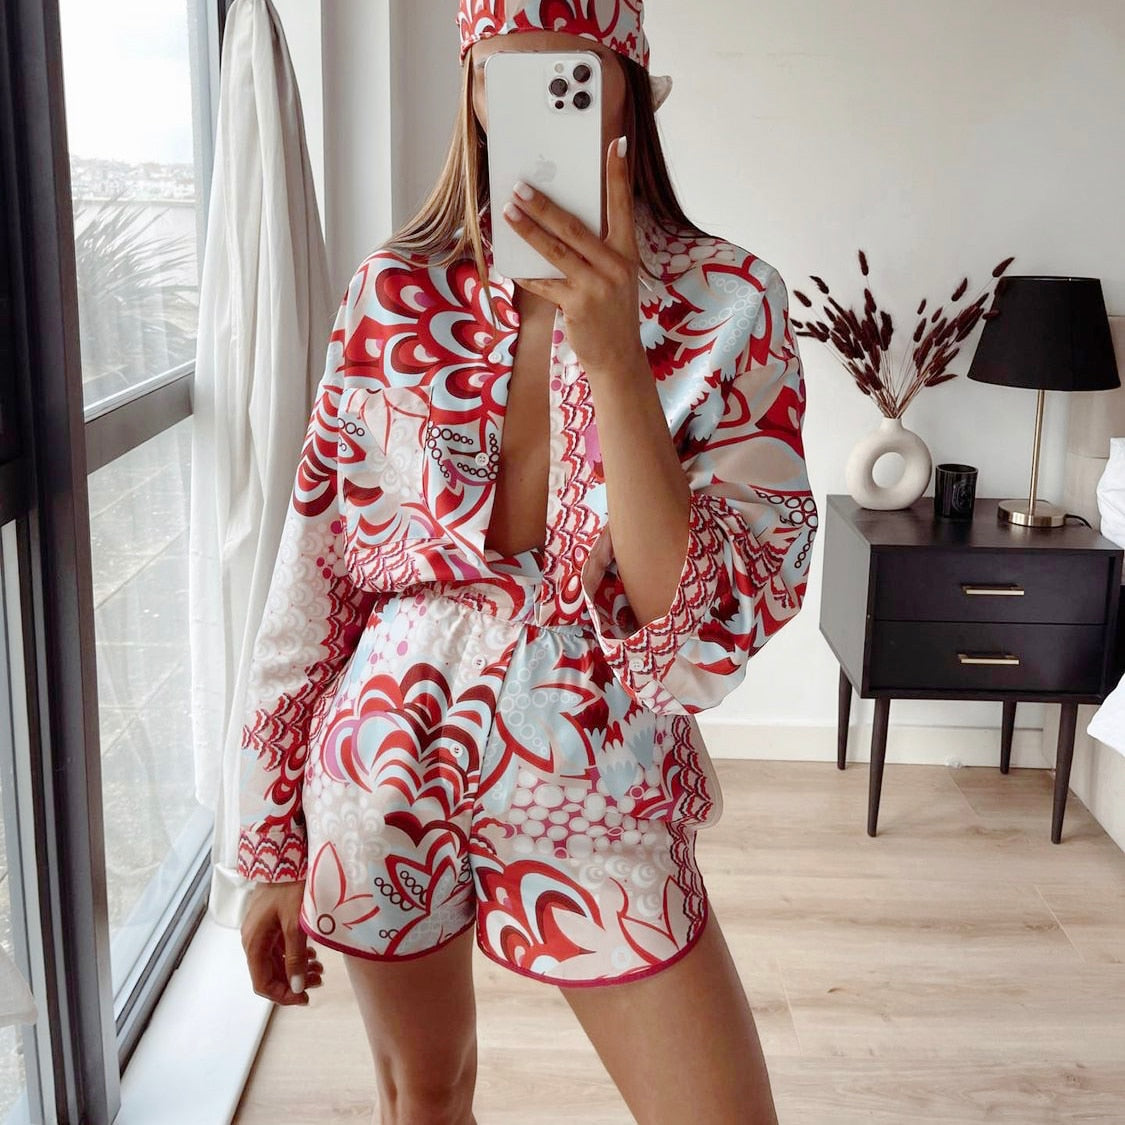 Vintage Totem Floral Print Women Shirt Hot Shorts Casual Sets 2021 Spring Summer Single Breasted Chic Clothes Streetwear